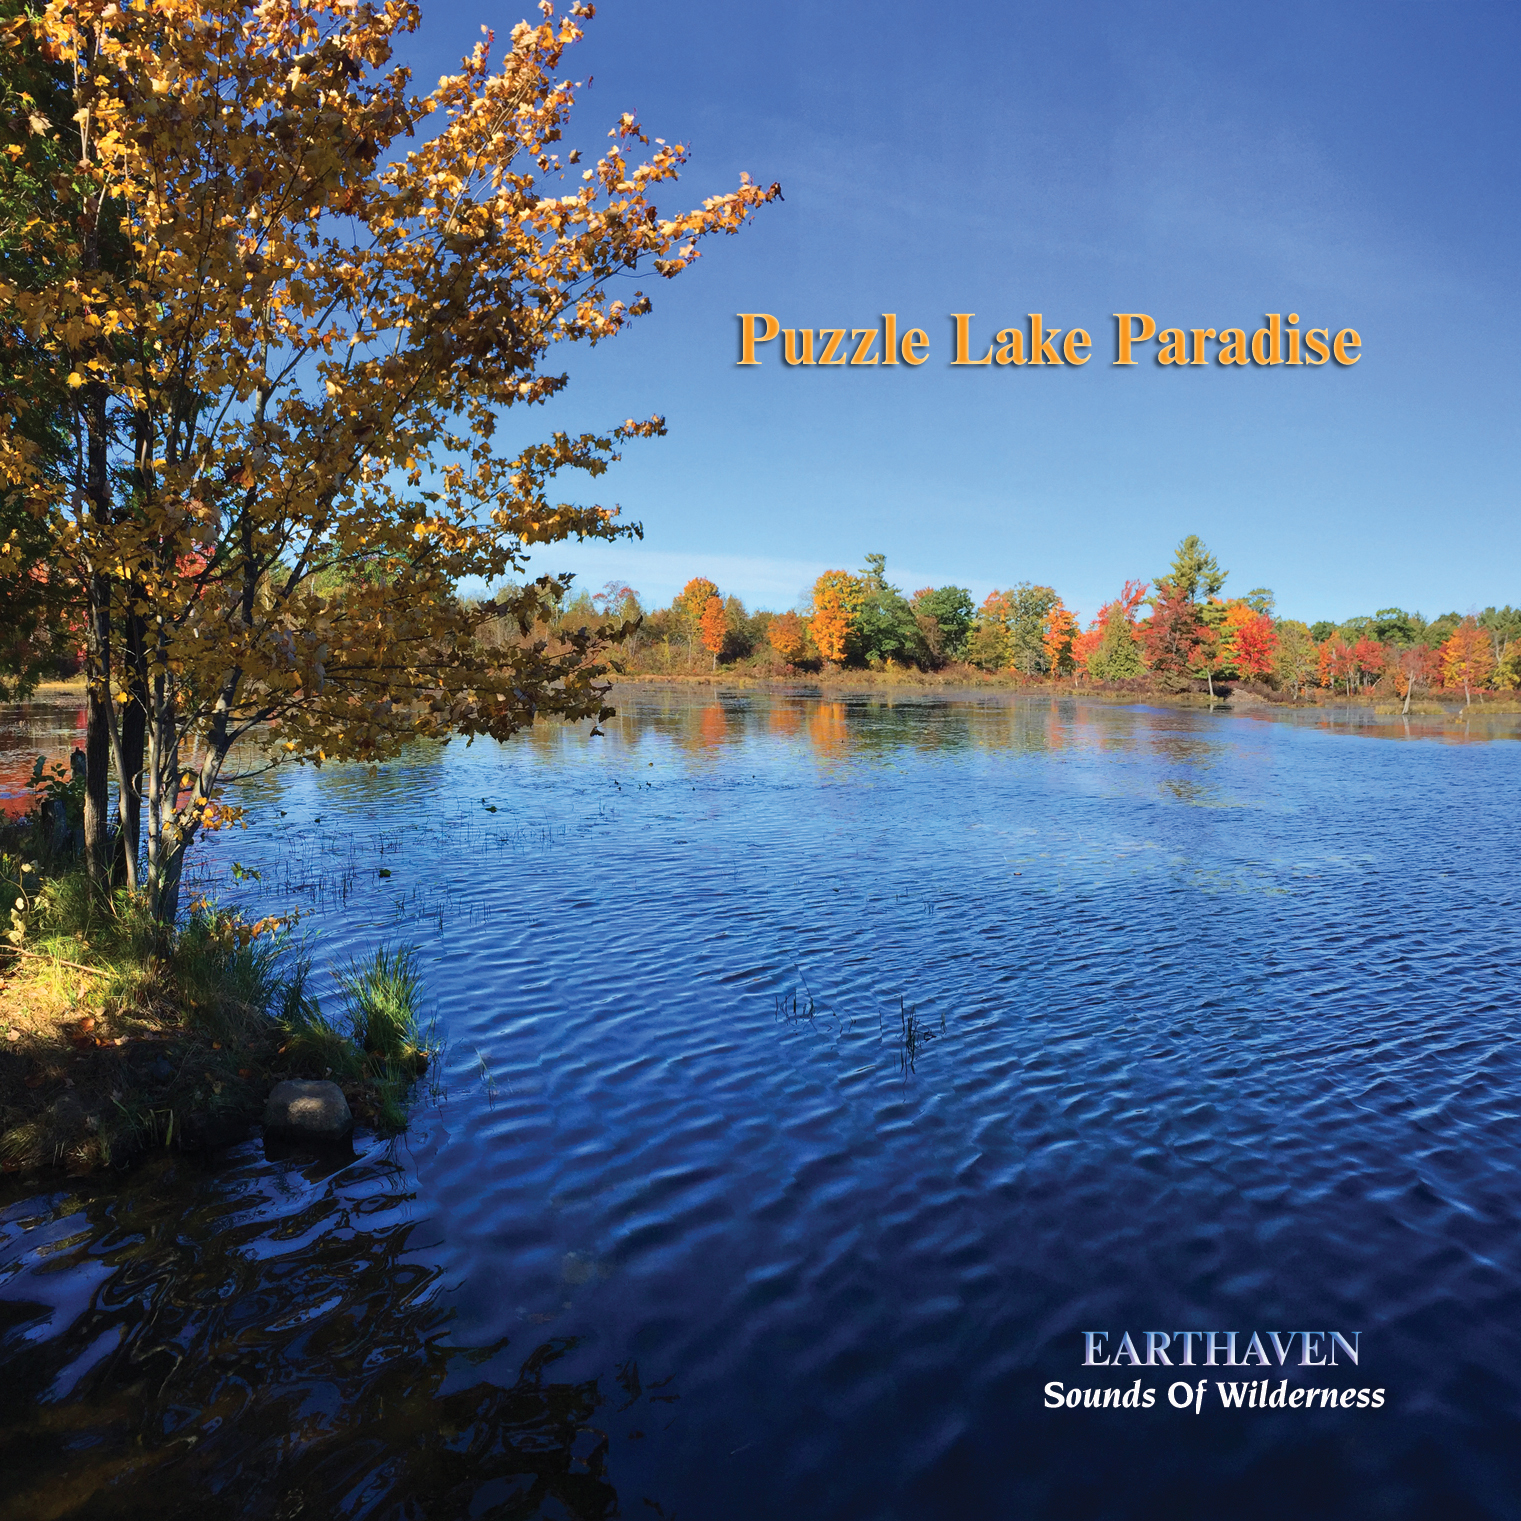 PUZZLE LAKE PARADISE: the latest from Stephen Bacchus